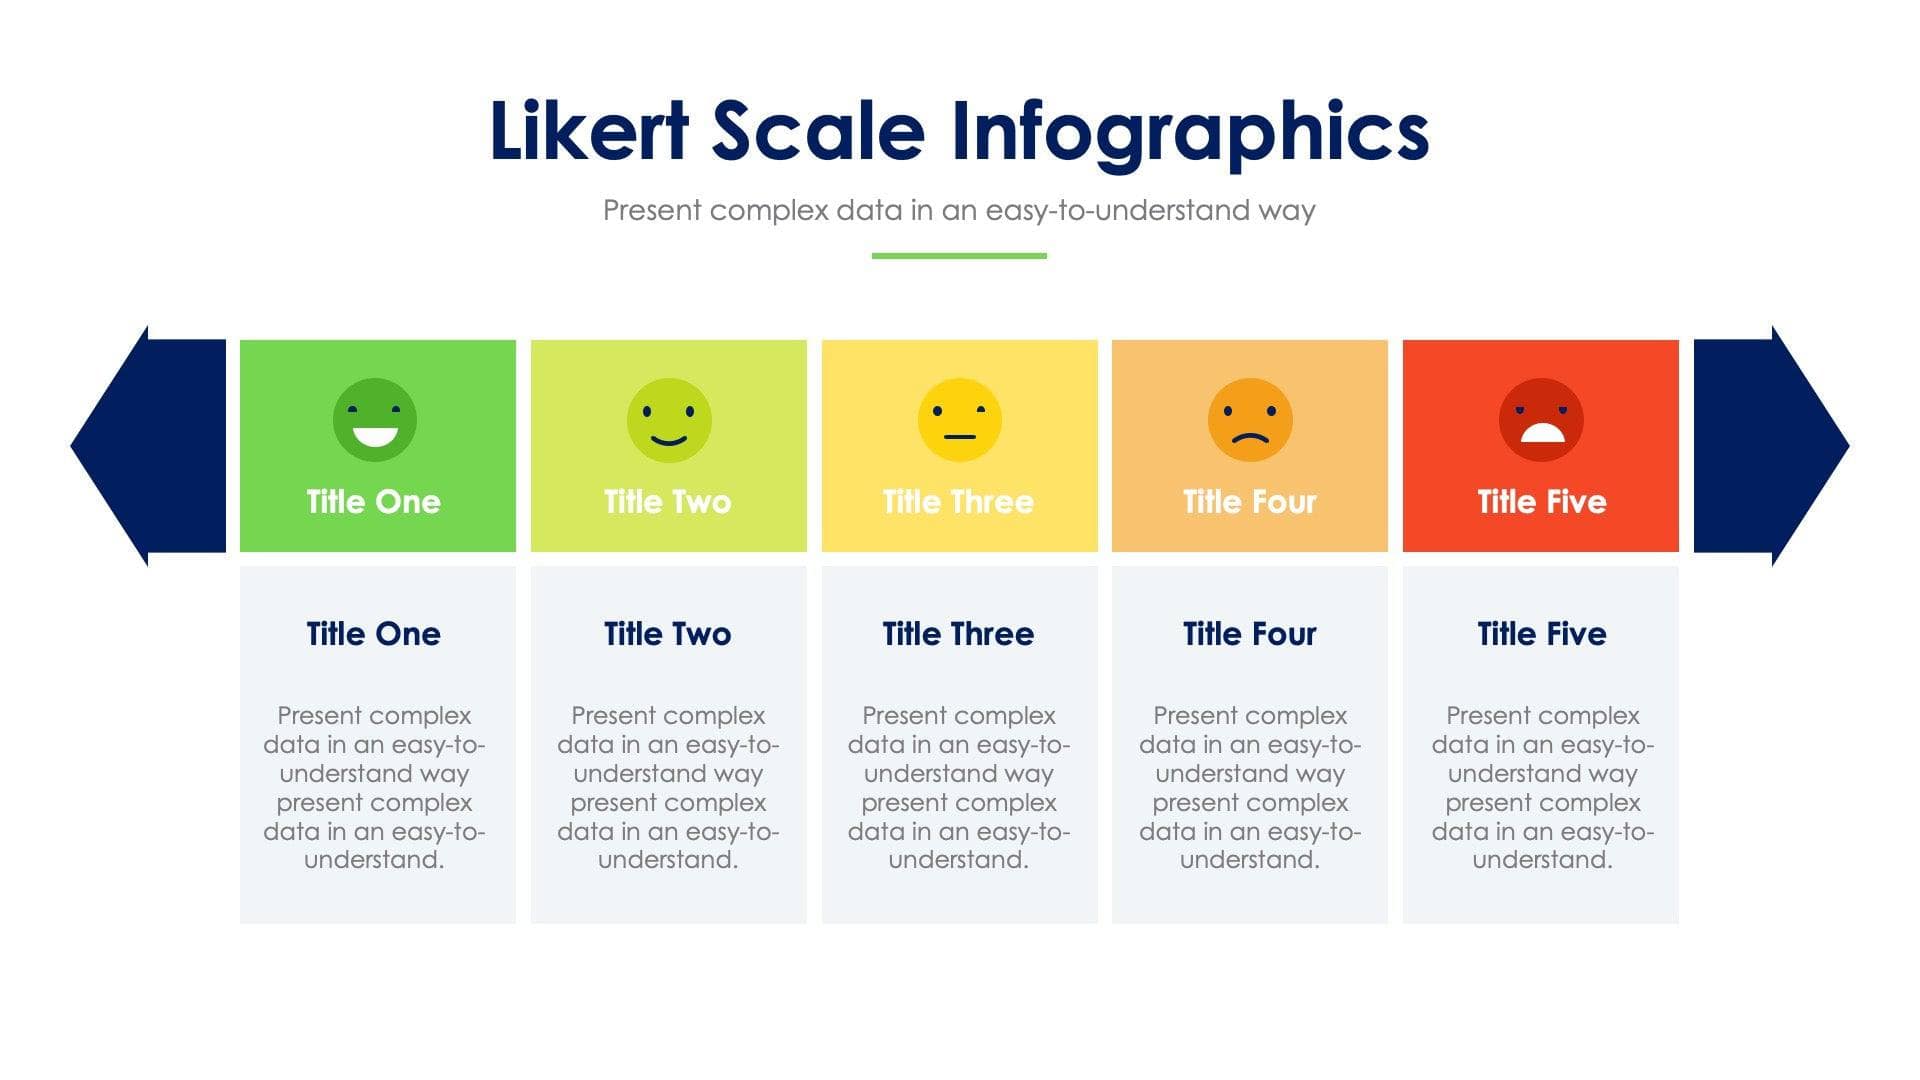 What Is a Likert Scale?